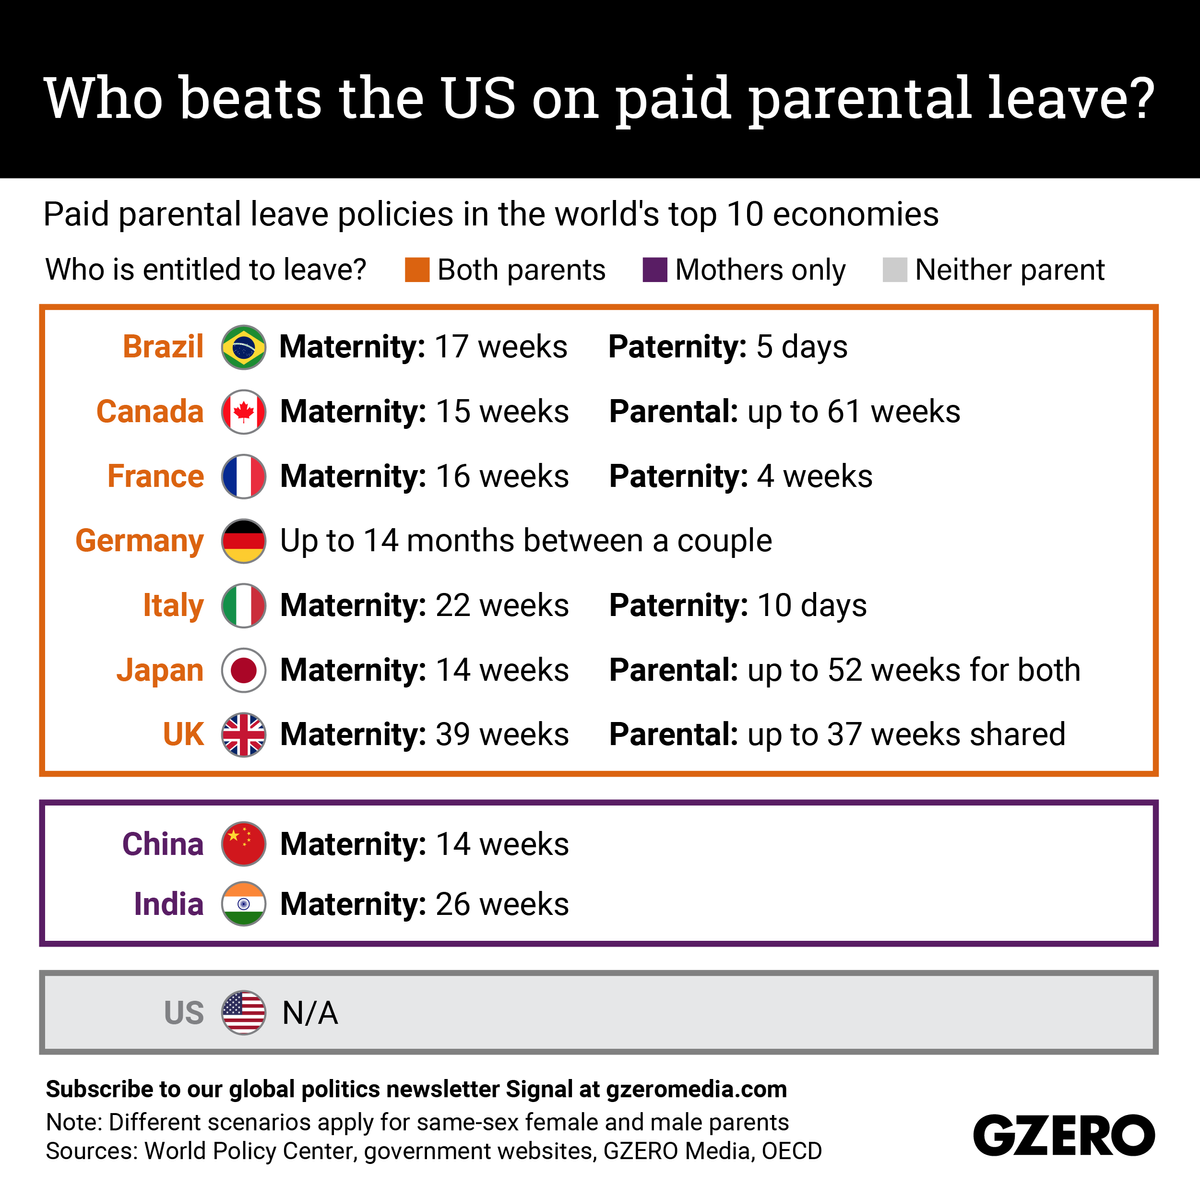 Paid parental leave policies in the world's top 10 economies